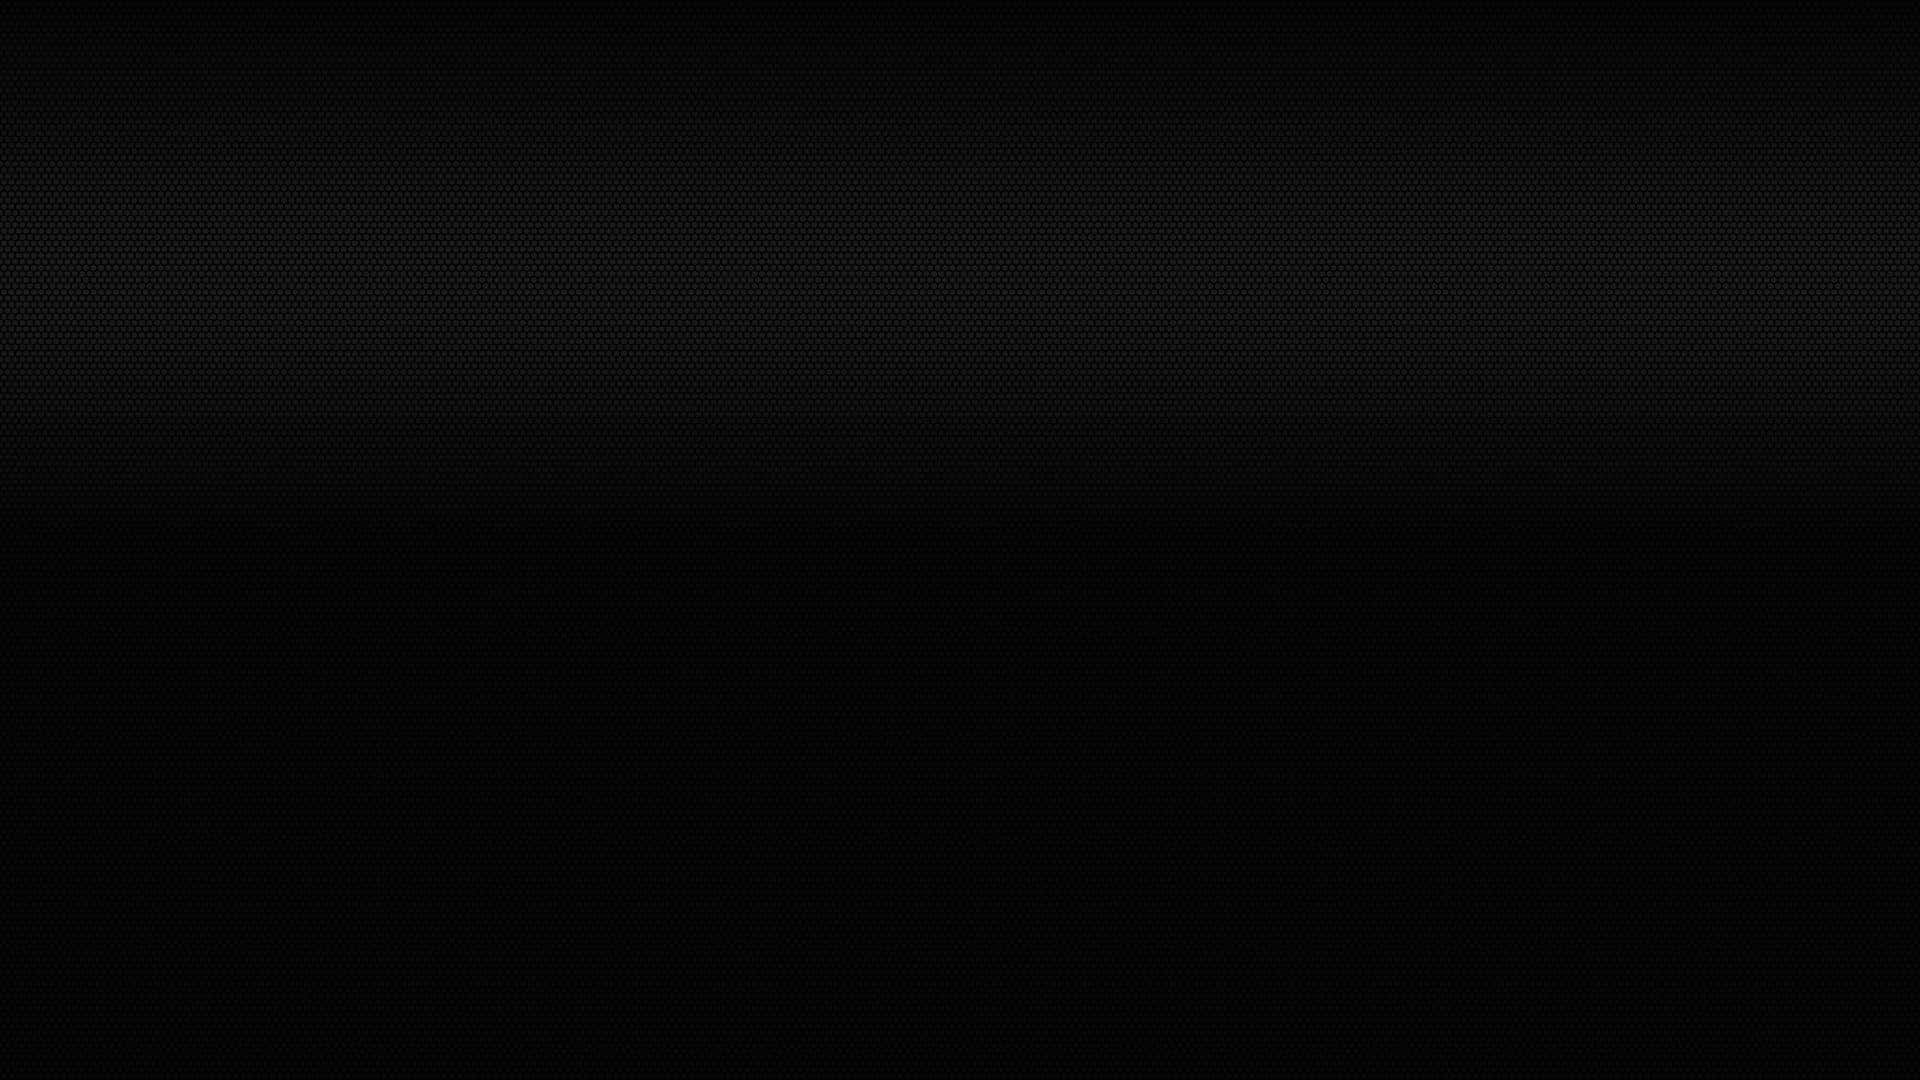 Top 999+ Pure Black Wallpaper Full HD, 4K✓Free to Use